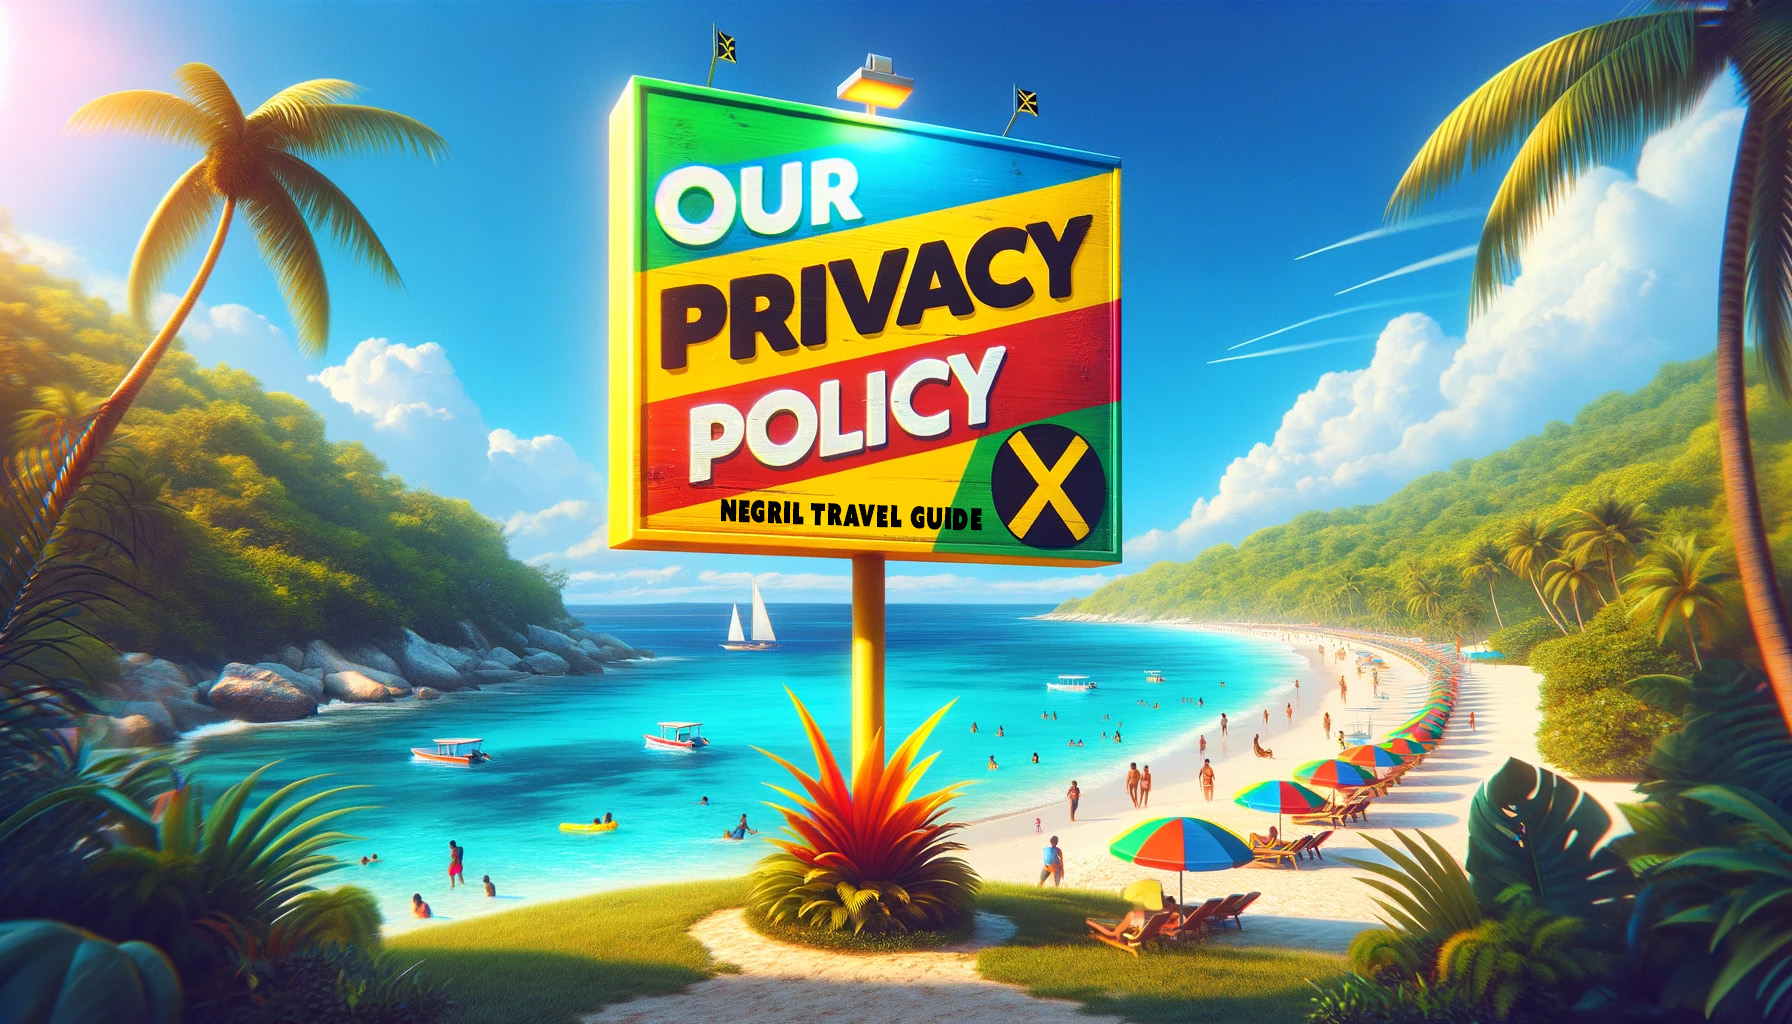 Our Privacy Policy - Negril Travel Guide